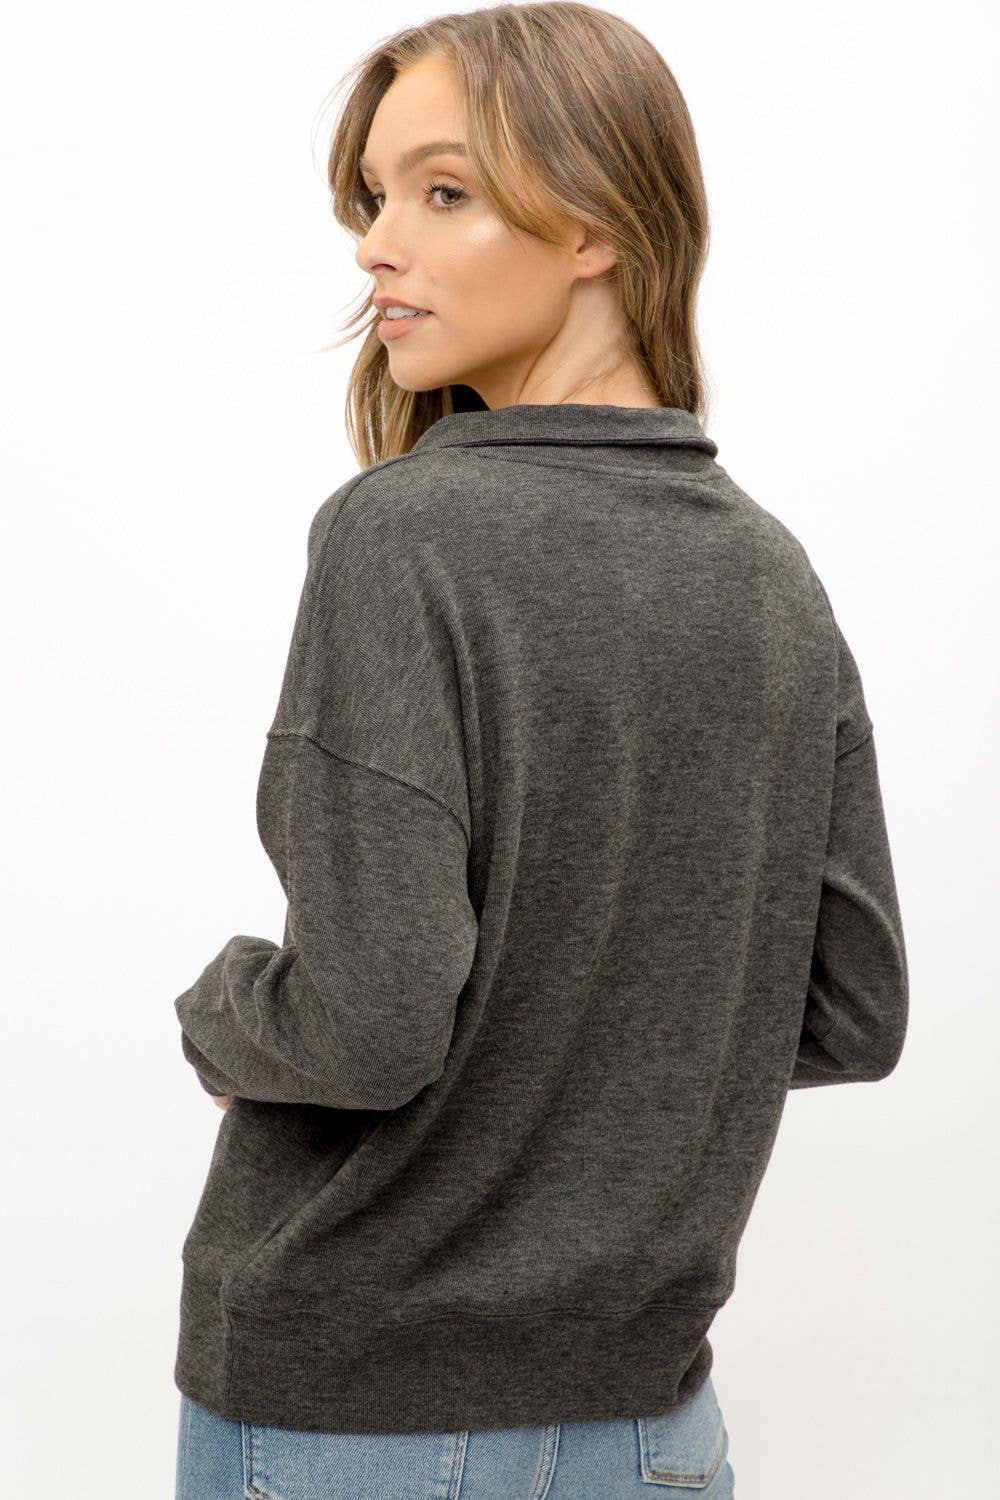 Mystree - Lace Up Top / Charcoal